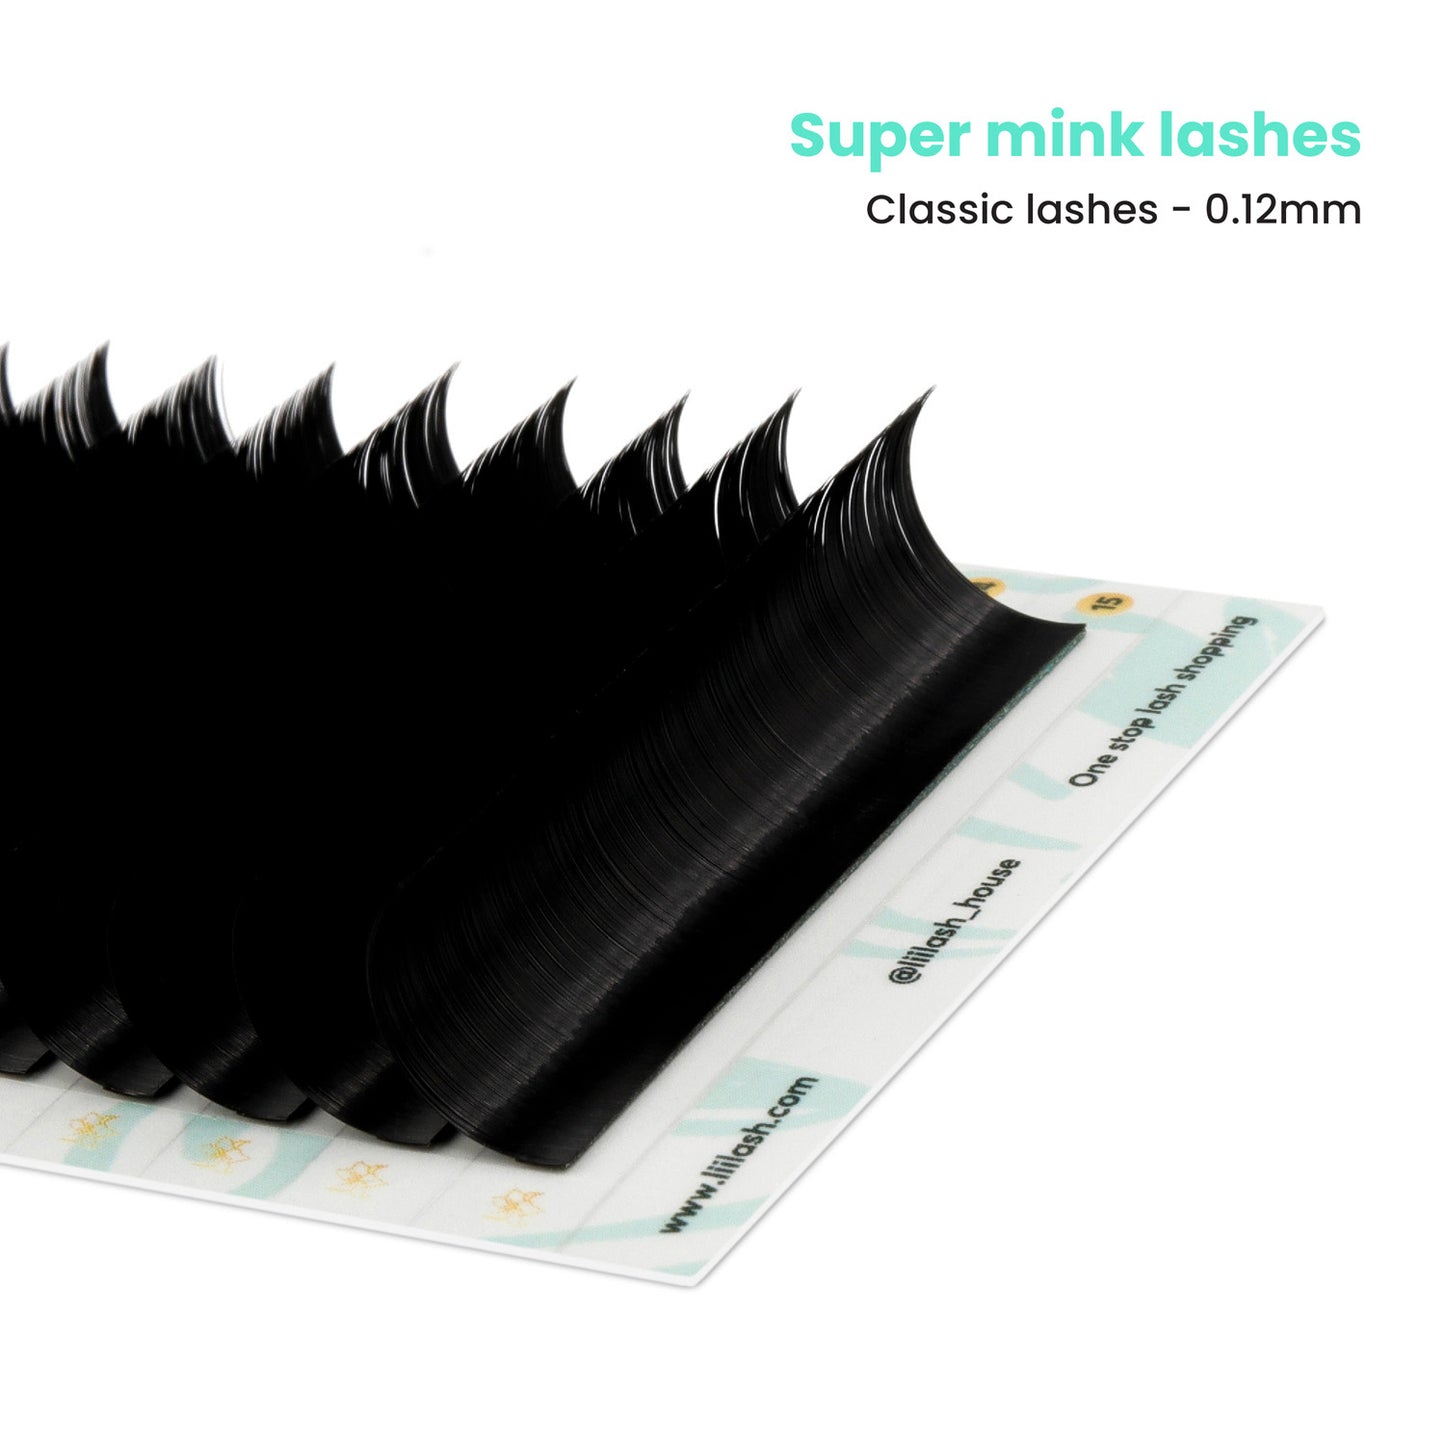 Dutch view - A partial view of Super Mink classic lash strips from below, angled tilt with lash strips tilting to the right.